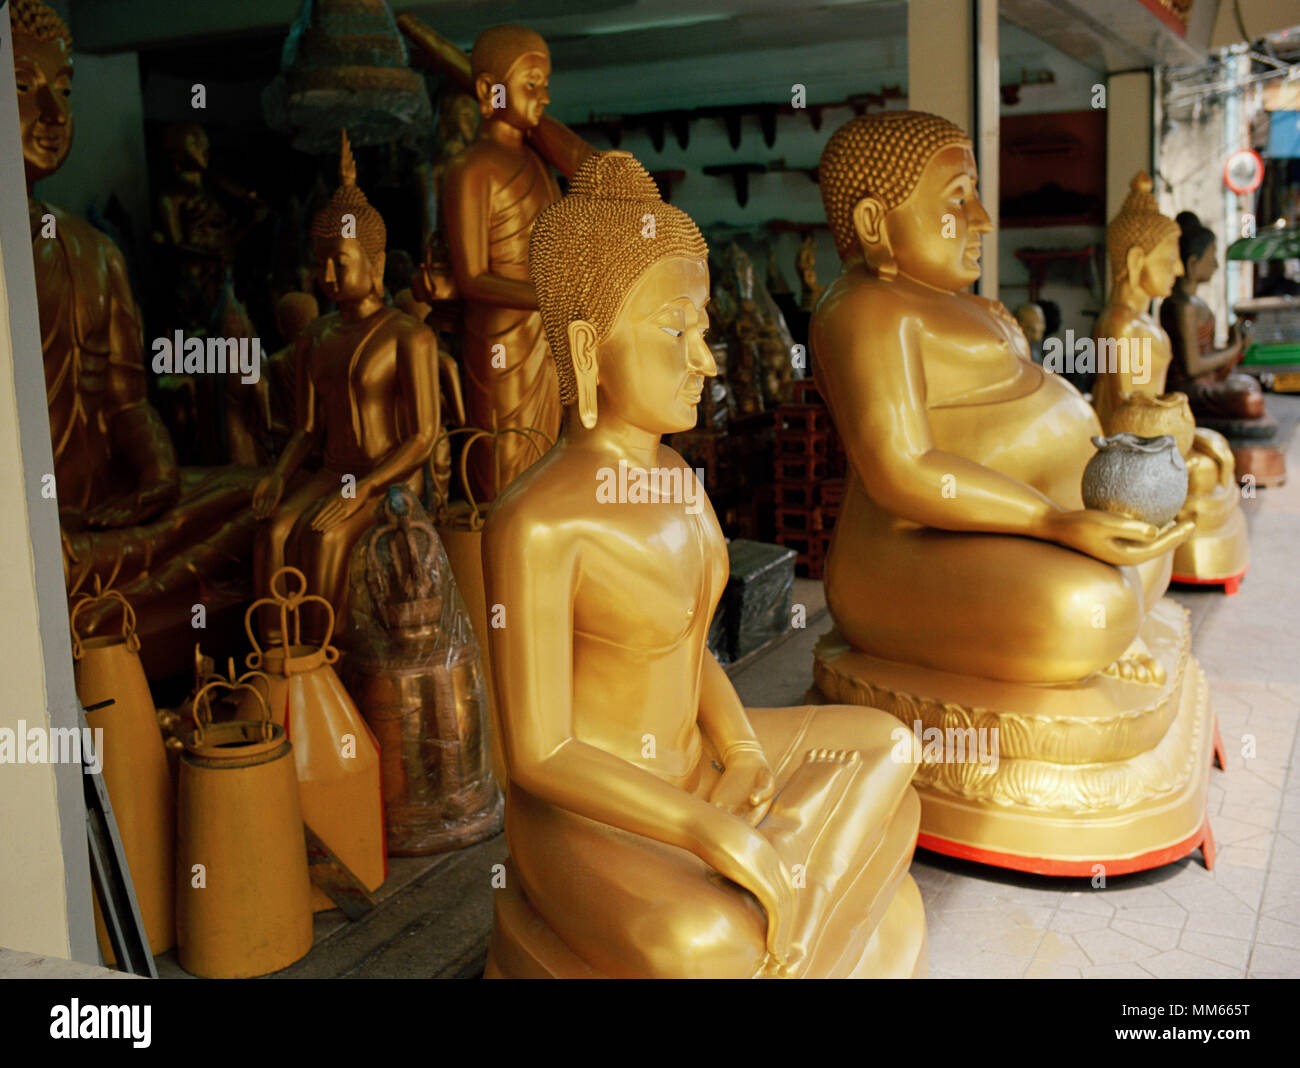 Thai Buddhism - Buddha statue art for sale in Bamrung Muang Road in Bangkok in Thailand in Southeast Asia Far East. Buddhist Serenity Serene Travel Stock Photo